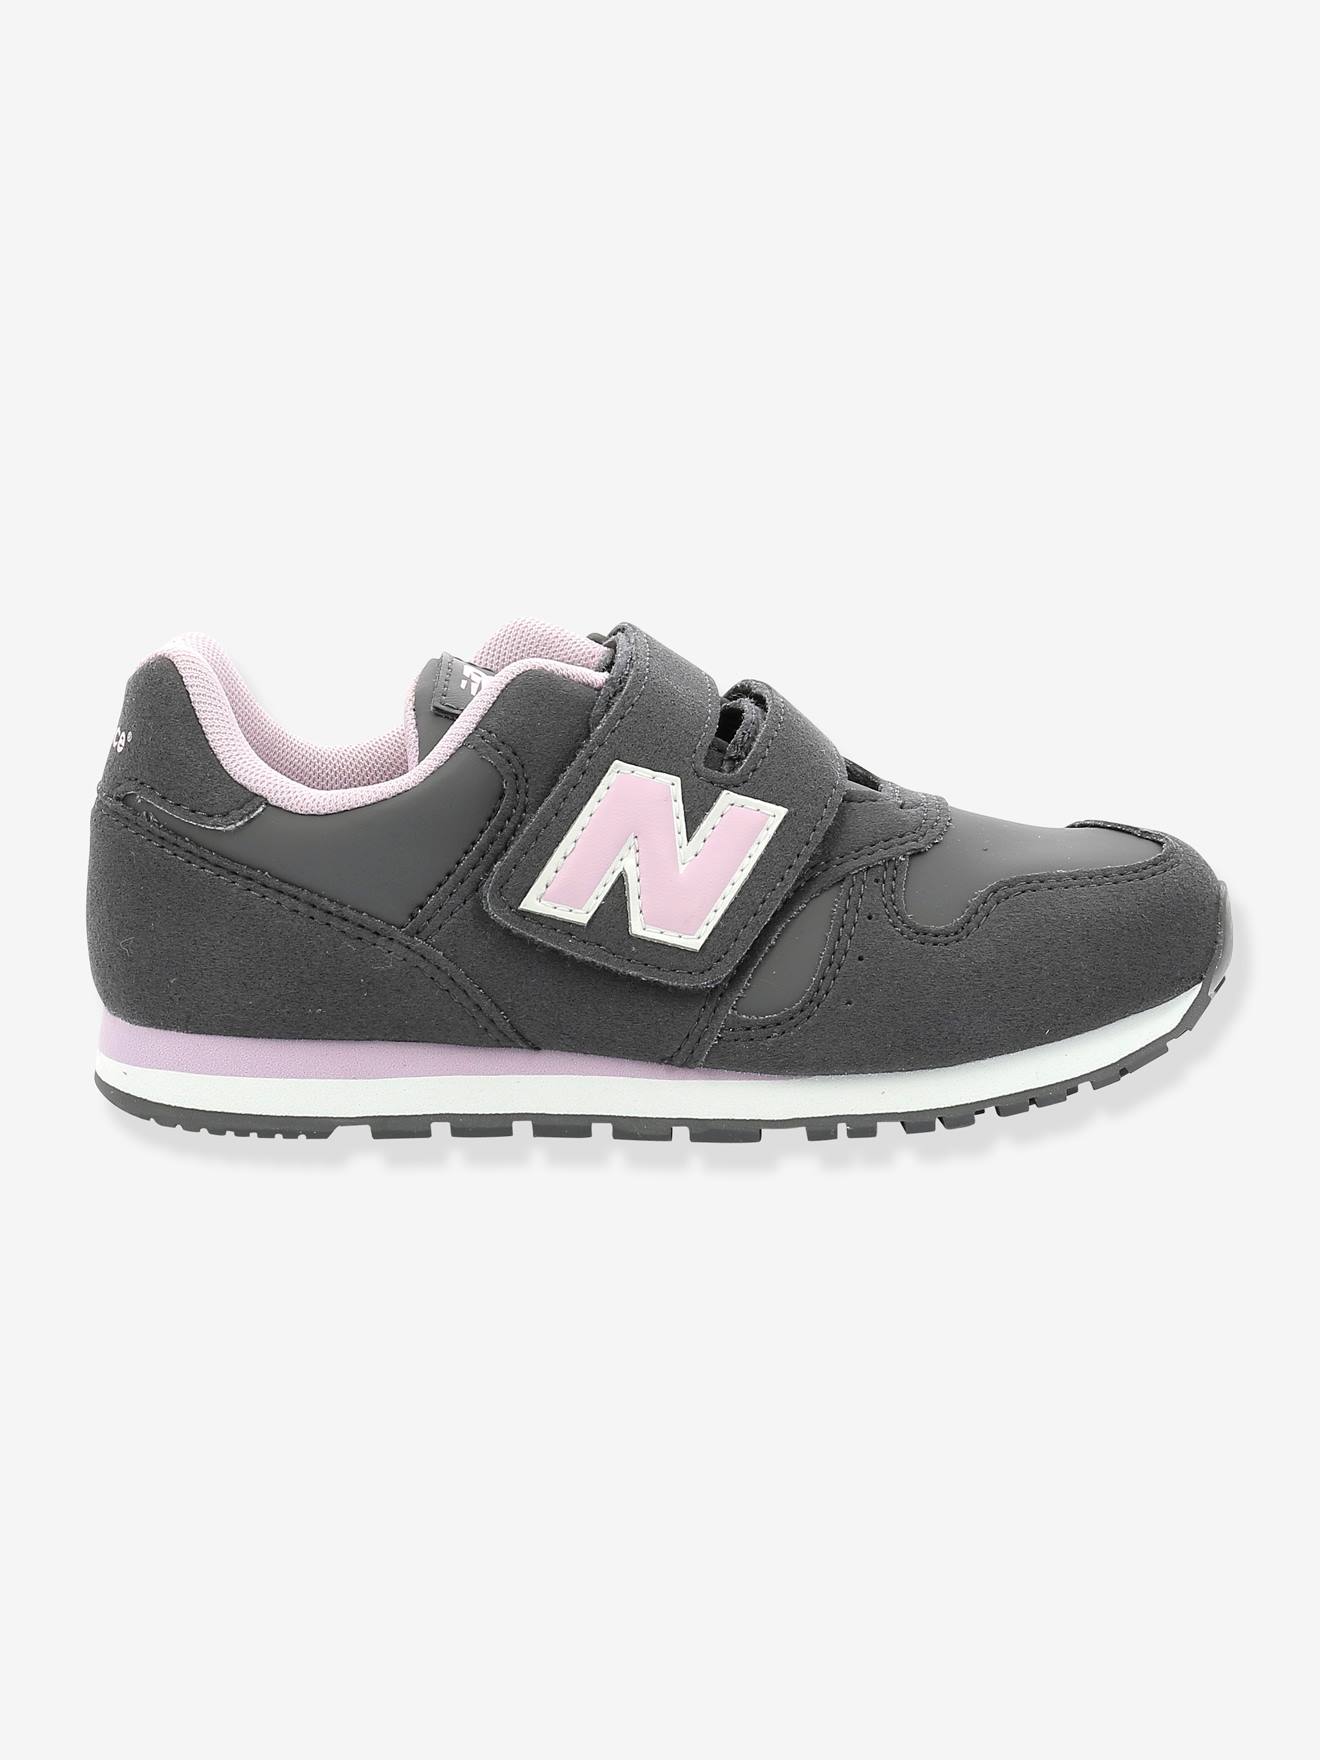 Purchase > basket new balance fille, Up to 71% OFF